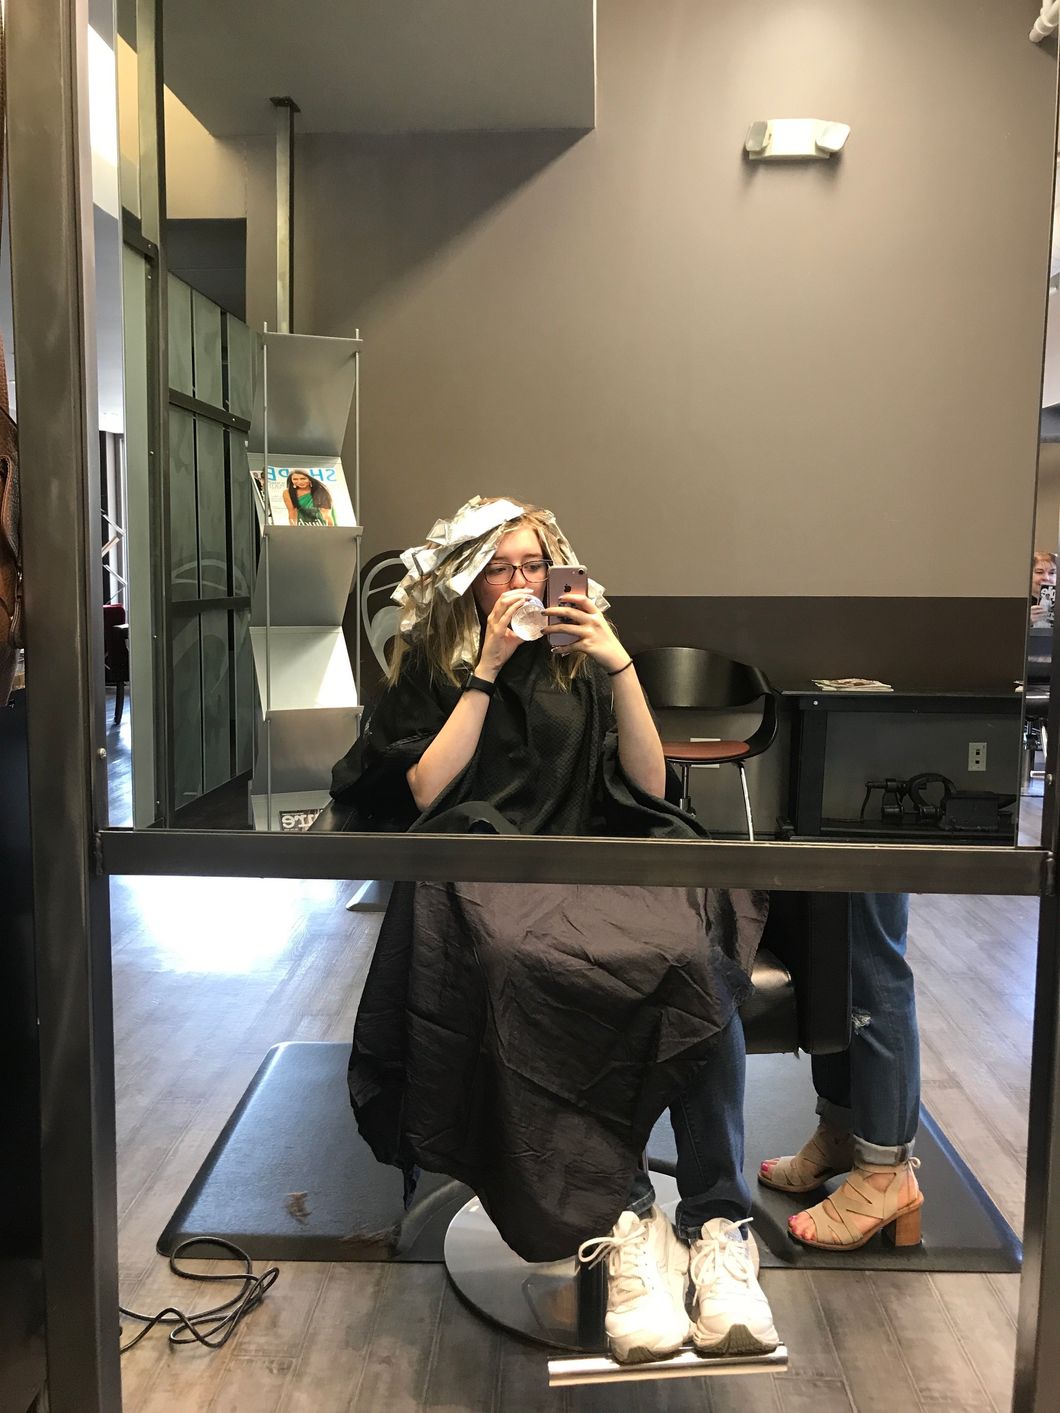 10 Thoughts You Have When You're Getting Your Hair done